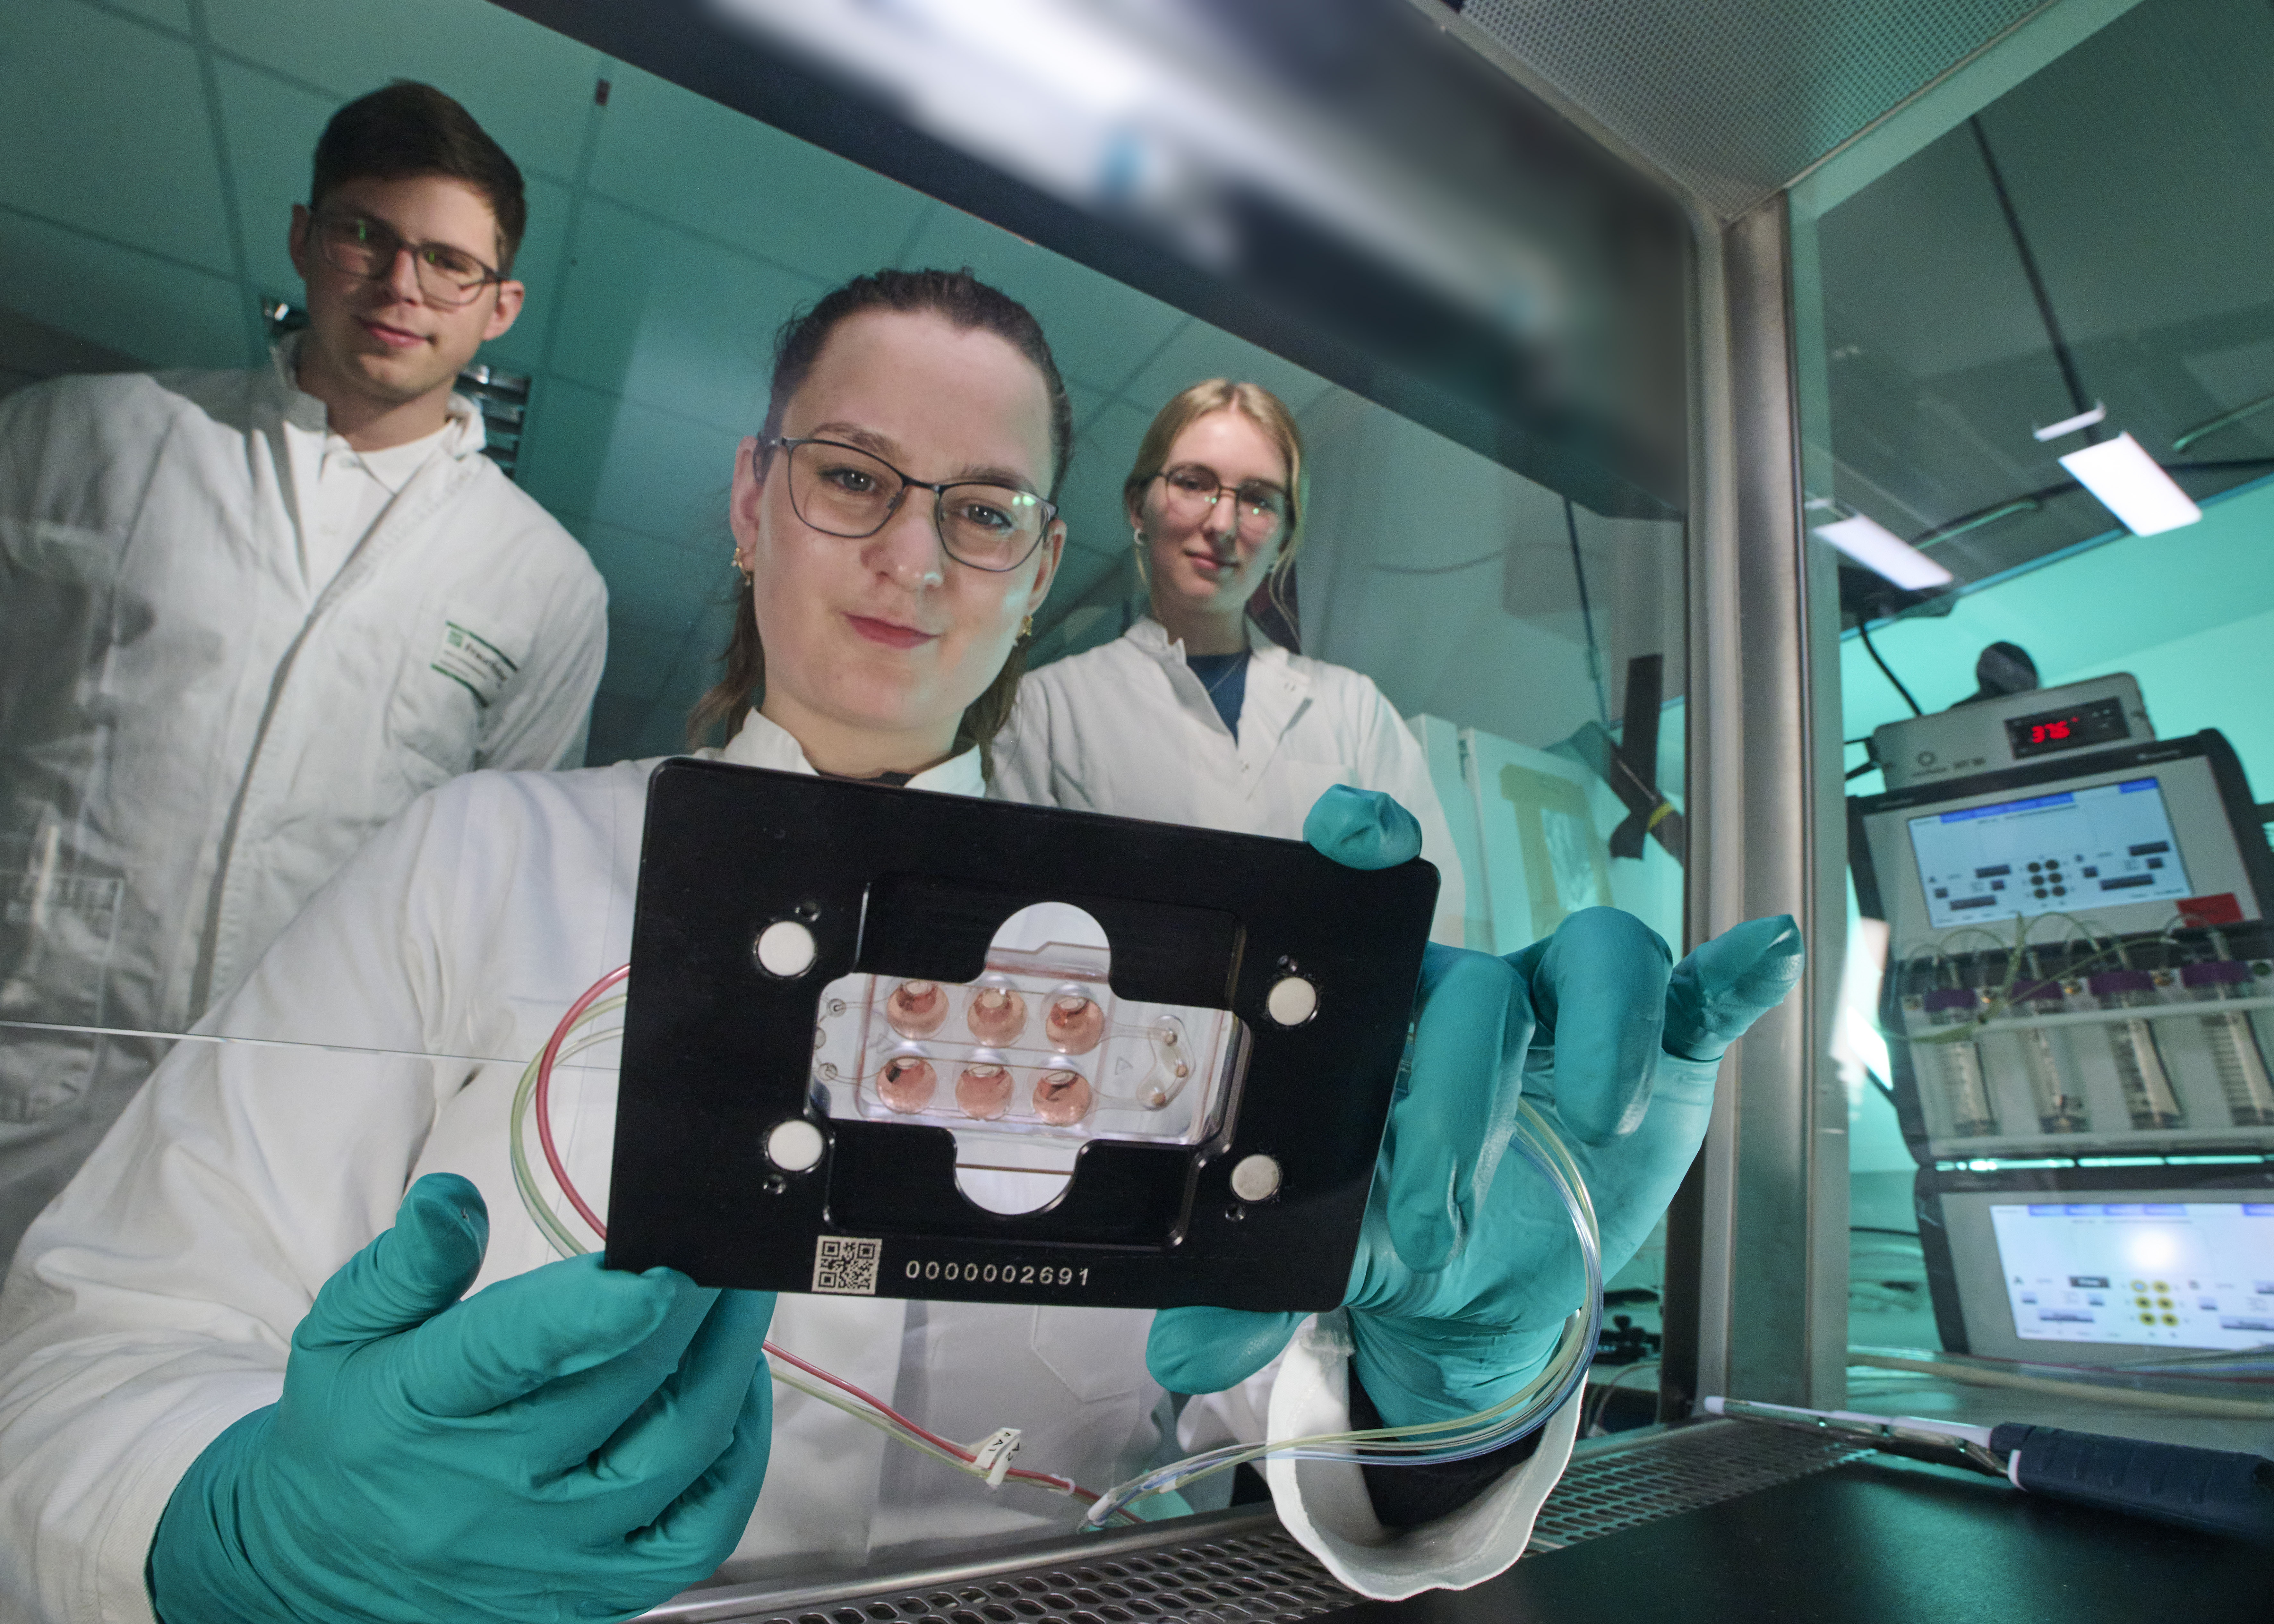 Researchers from Fraunhofer ITEM, Fraunhofer IWS, and the University of Regensburg are jointly investigating the growth of tumor cells in microphysiological systems.